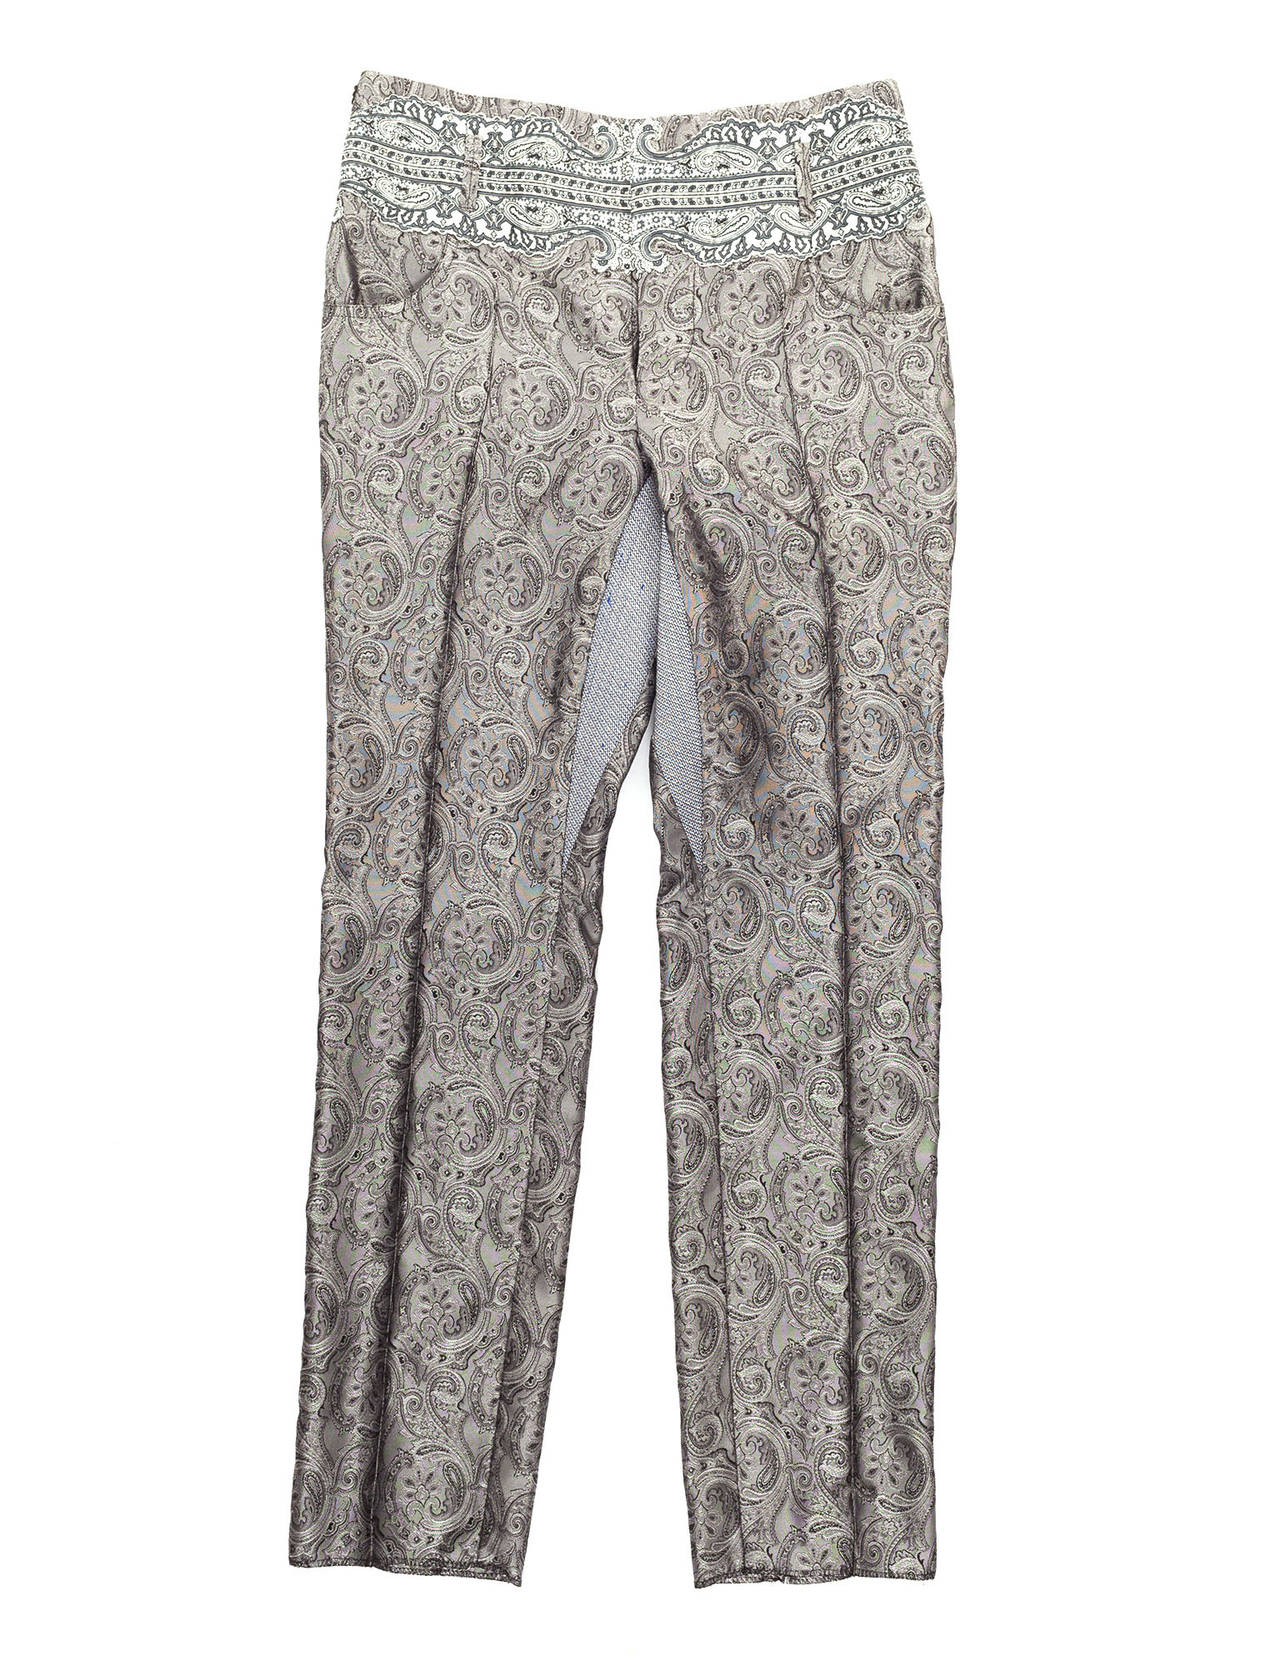 Pants have printed lace applique´ overlay, straight slim fit, paisley silk jacquard, multi inset details.